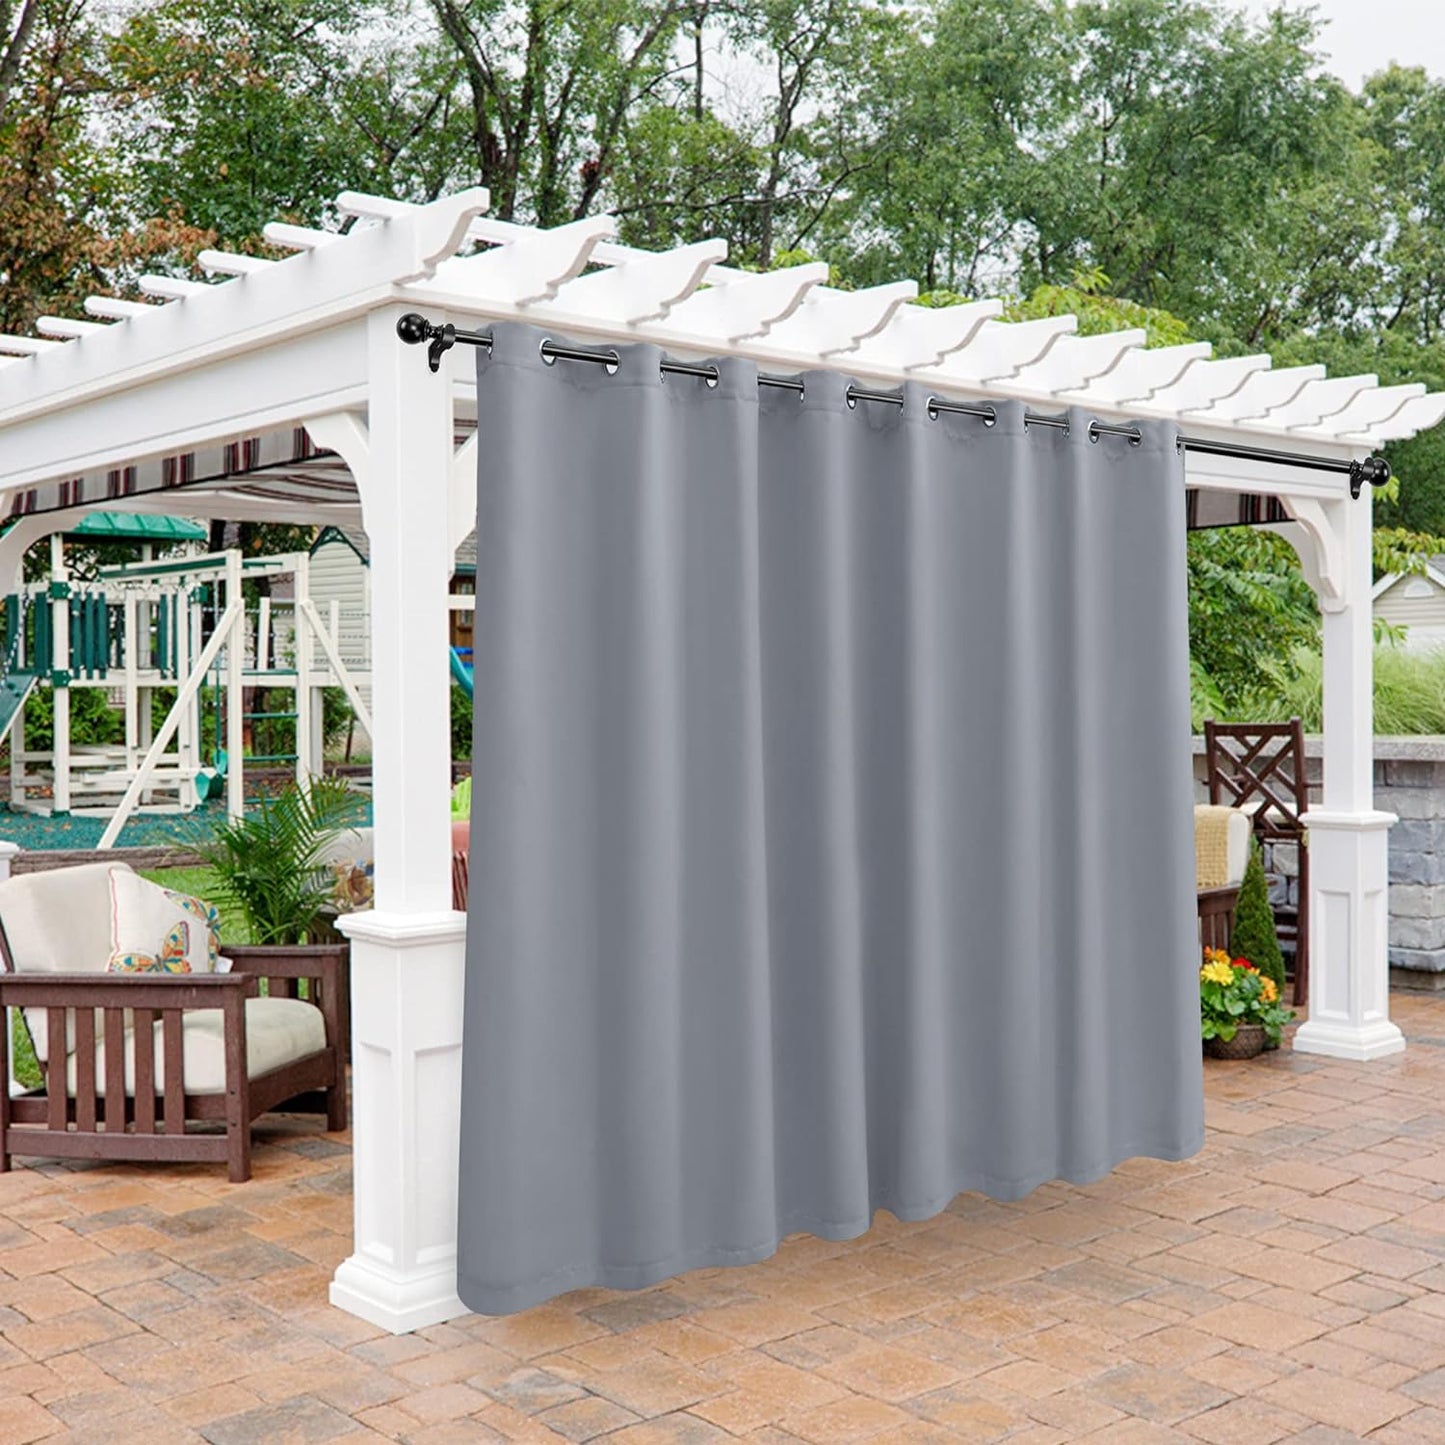 BONZER Outdoor Curtains for Patio Waterproof - Light Blocking Weather Resistant Privacy Grommet Blackout Curtains for Gazebo, Porch, Pergola, Cabana, Deck, Sunroom, 1 Panel, 52W X 84L Inch, Silver  BONZER Silver 120W X 95 Inch 